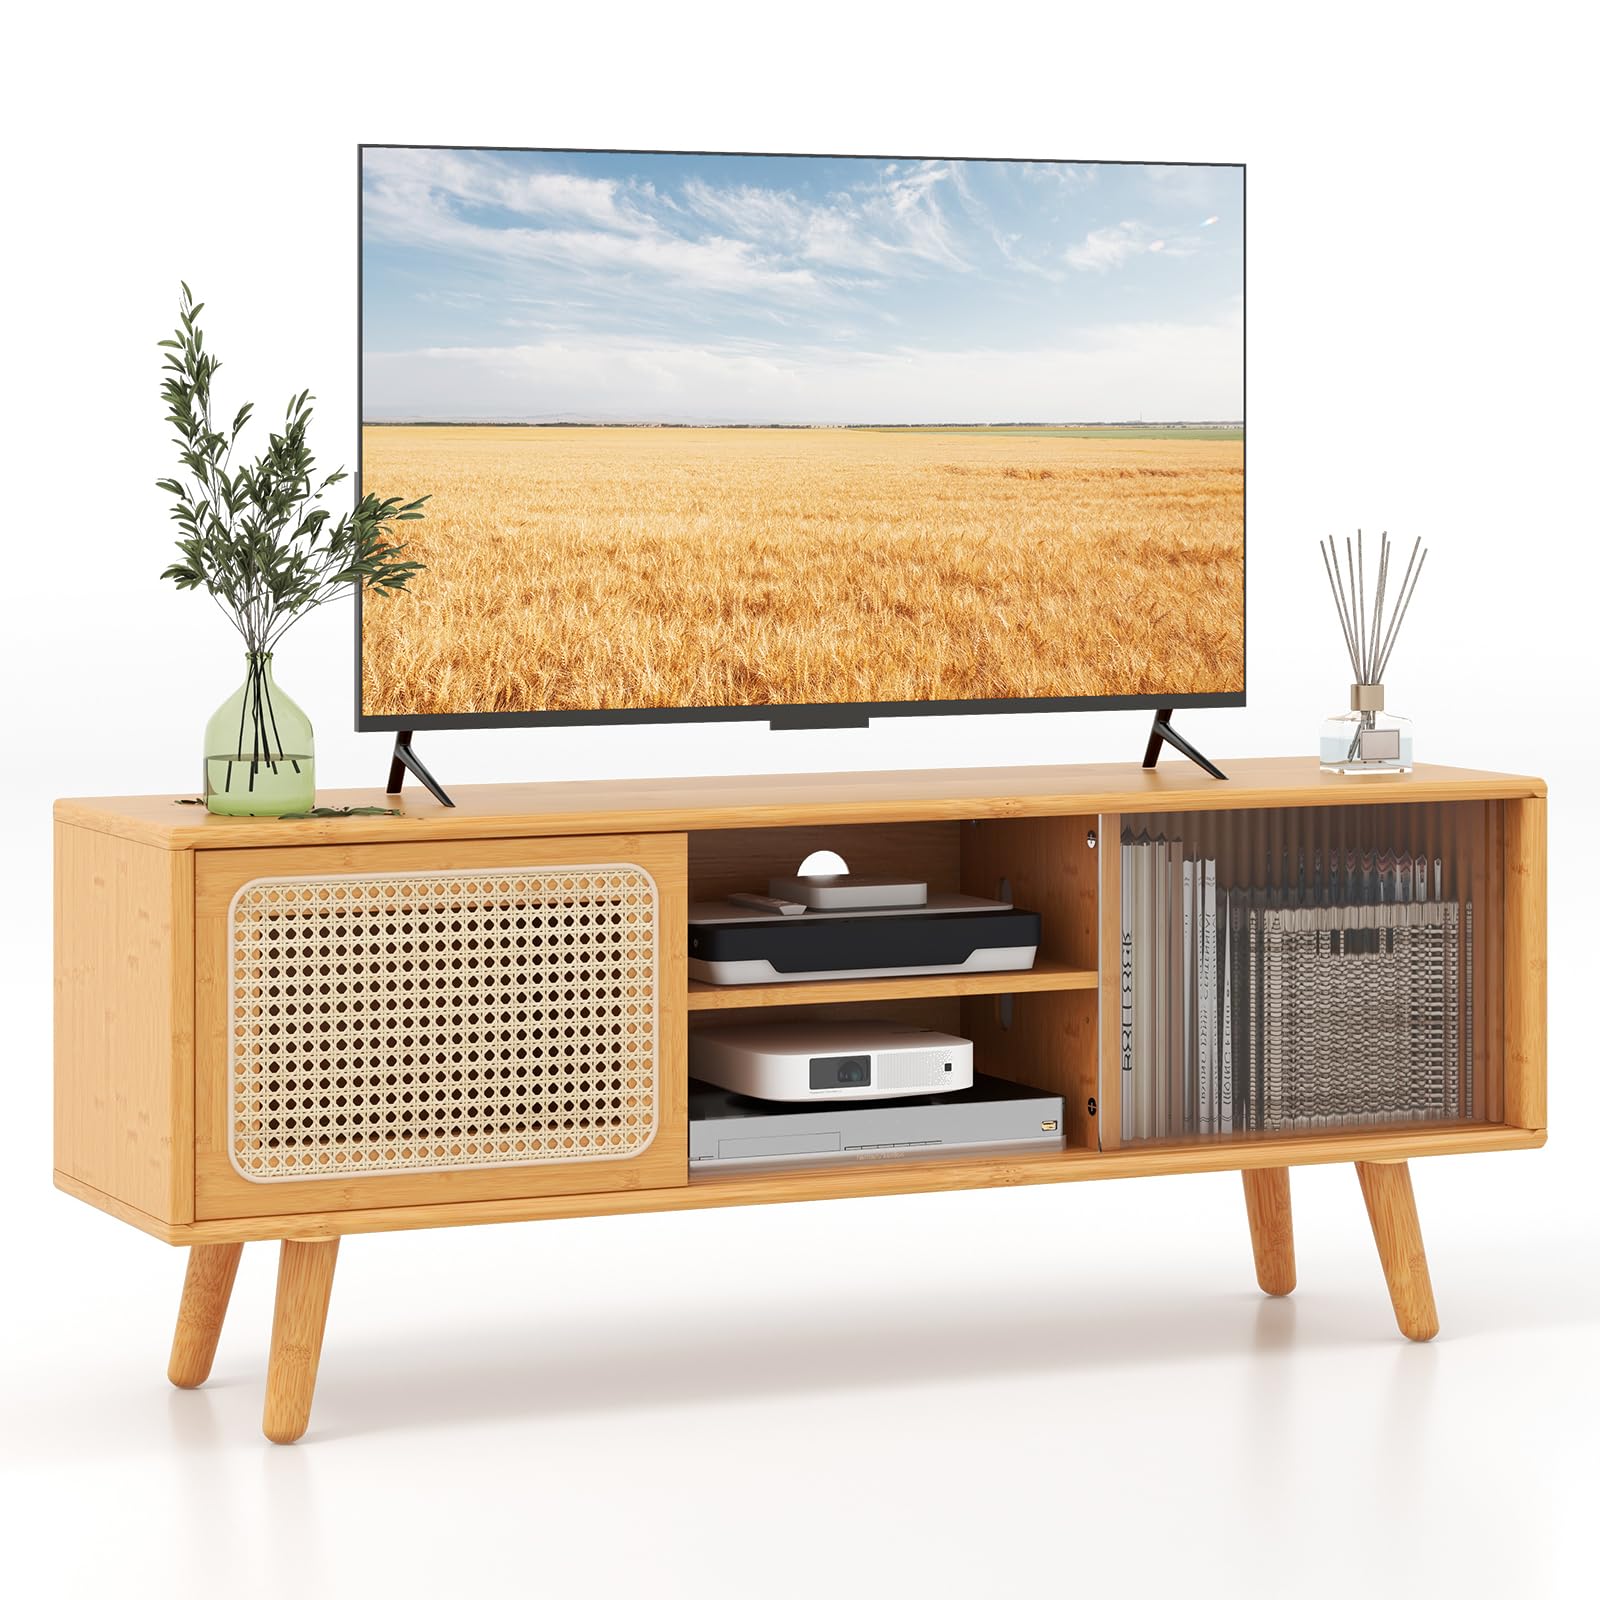 Giantex TV Stand for Living Room TVs up to 55”- Bamboo Entertainment Center